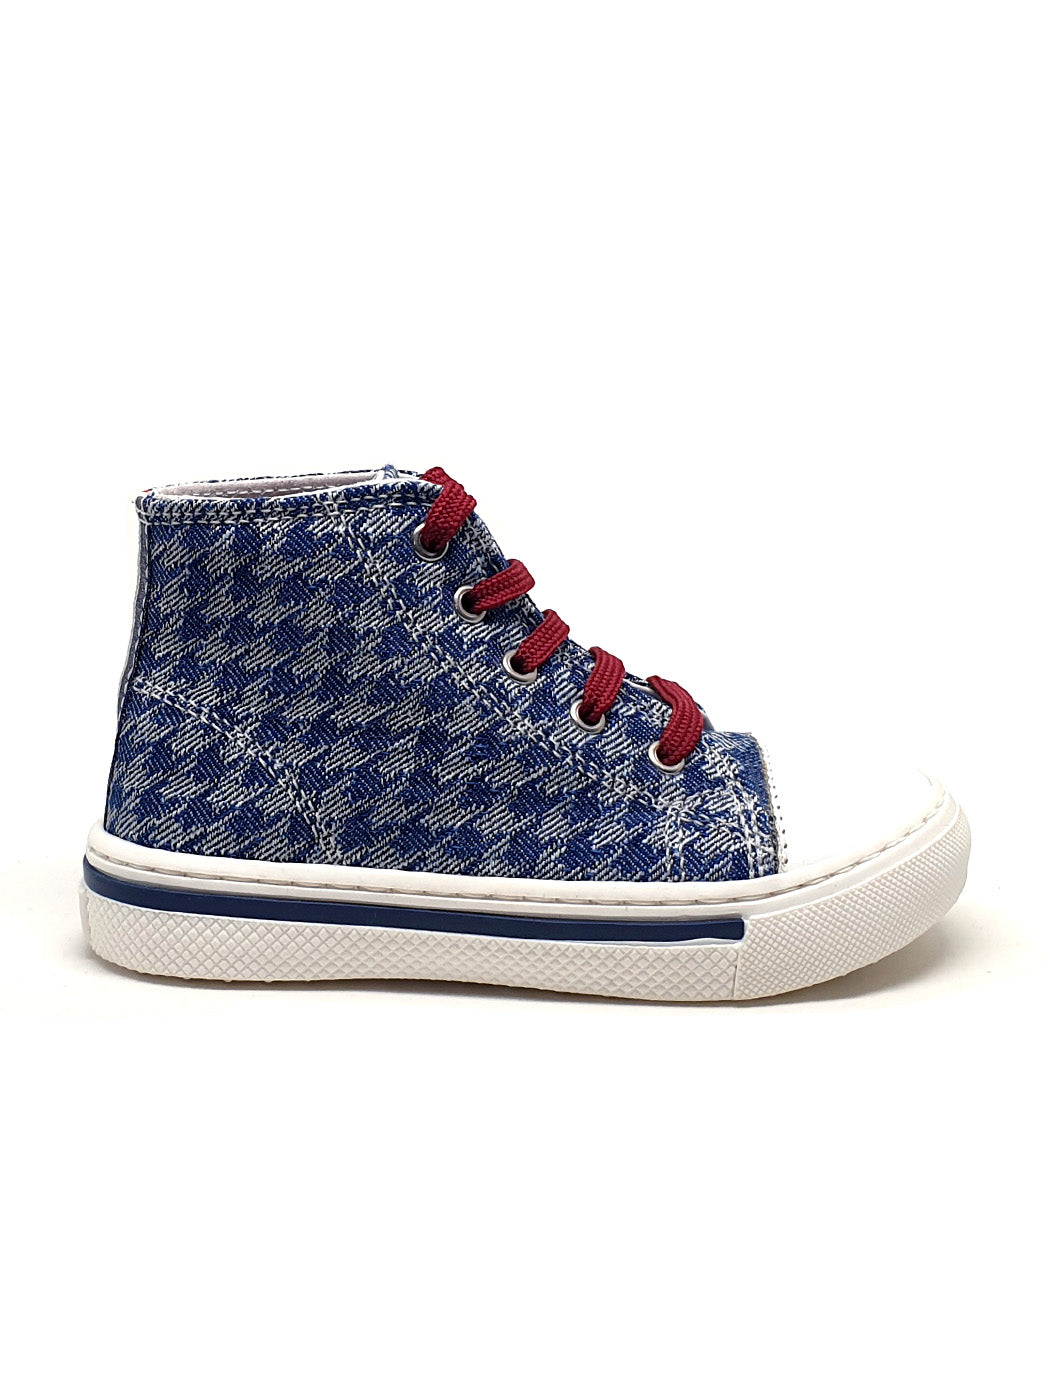 Baby bootie shoe for boy-CHRISTOFER blue